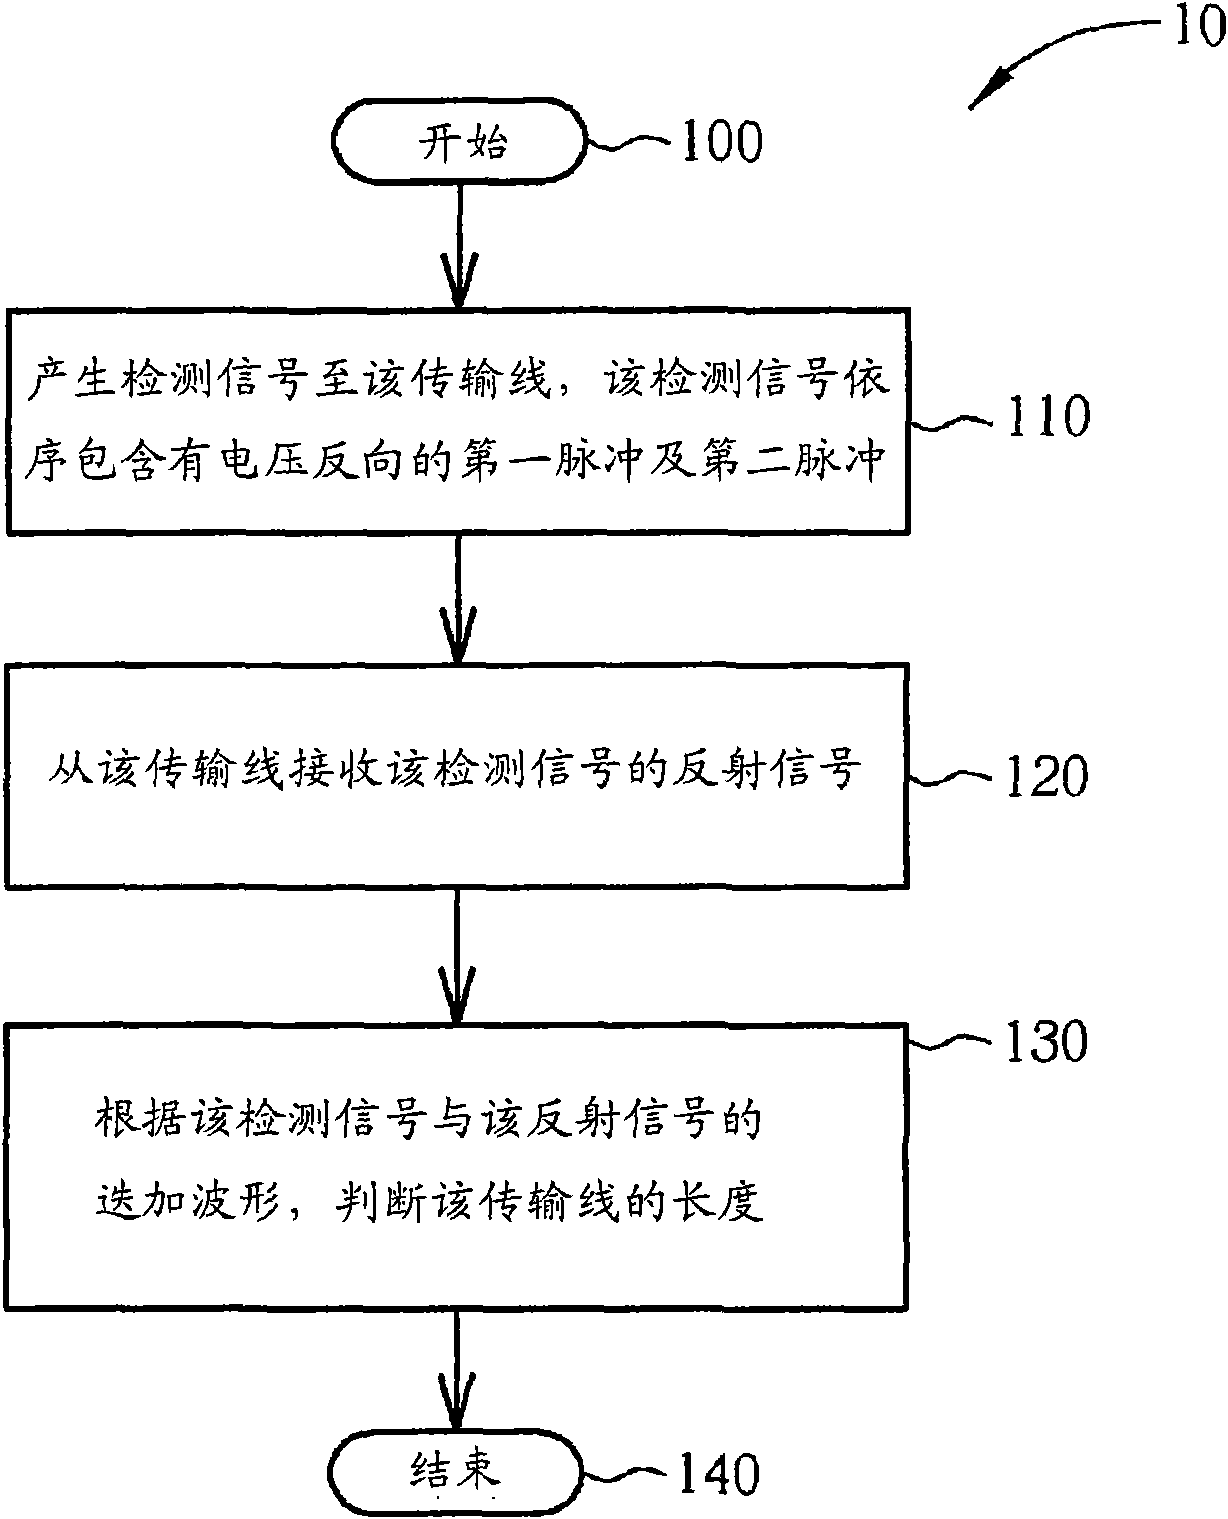 Method and device for estimating length of transmission line